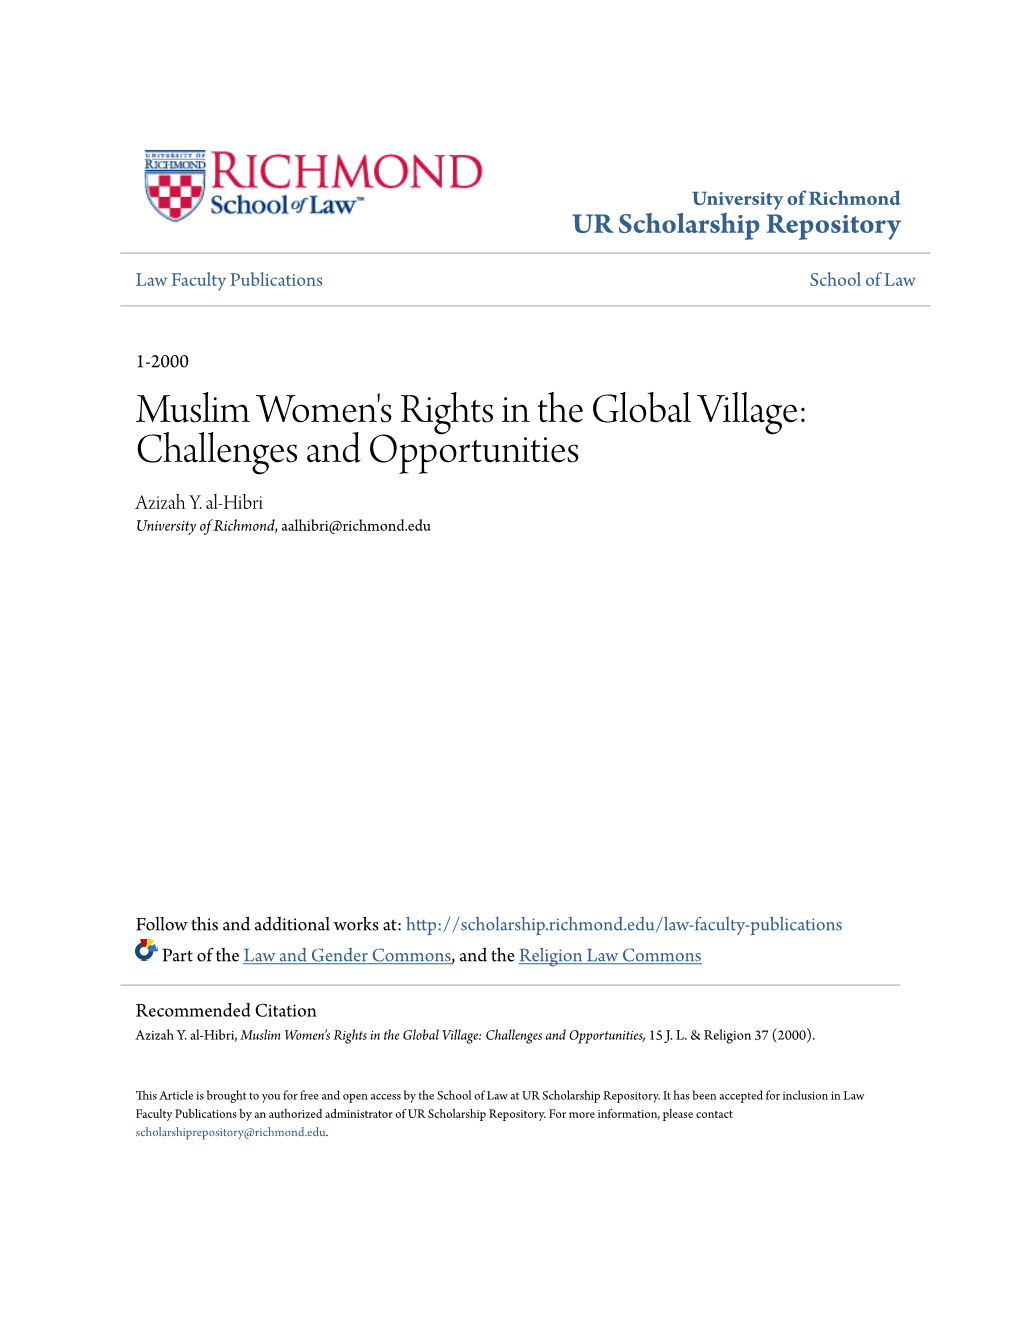 Muslim Women's Rights in the Global Village: Challenges and Opportunities Azizah Y